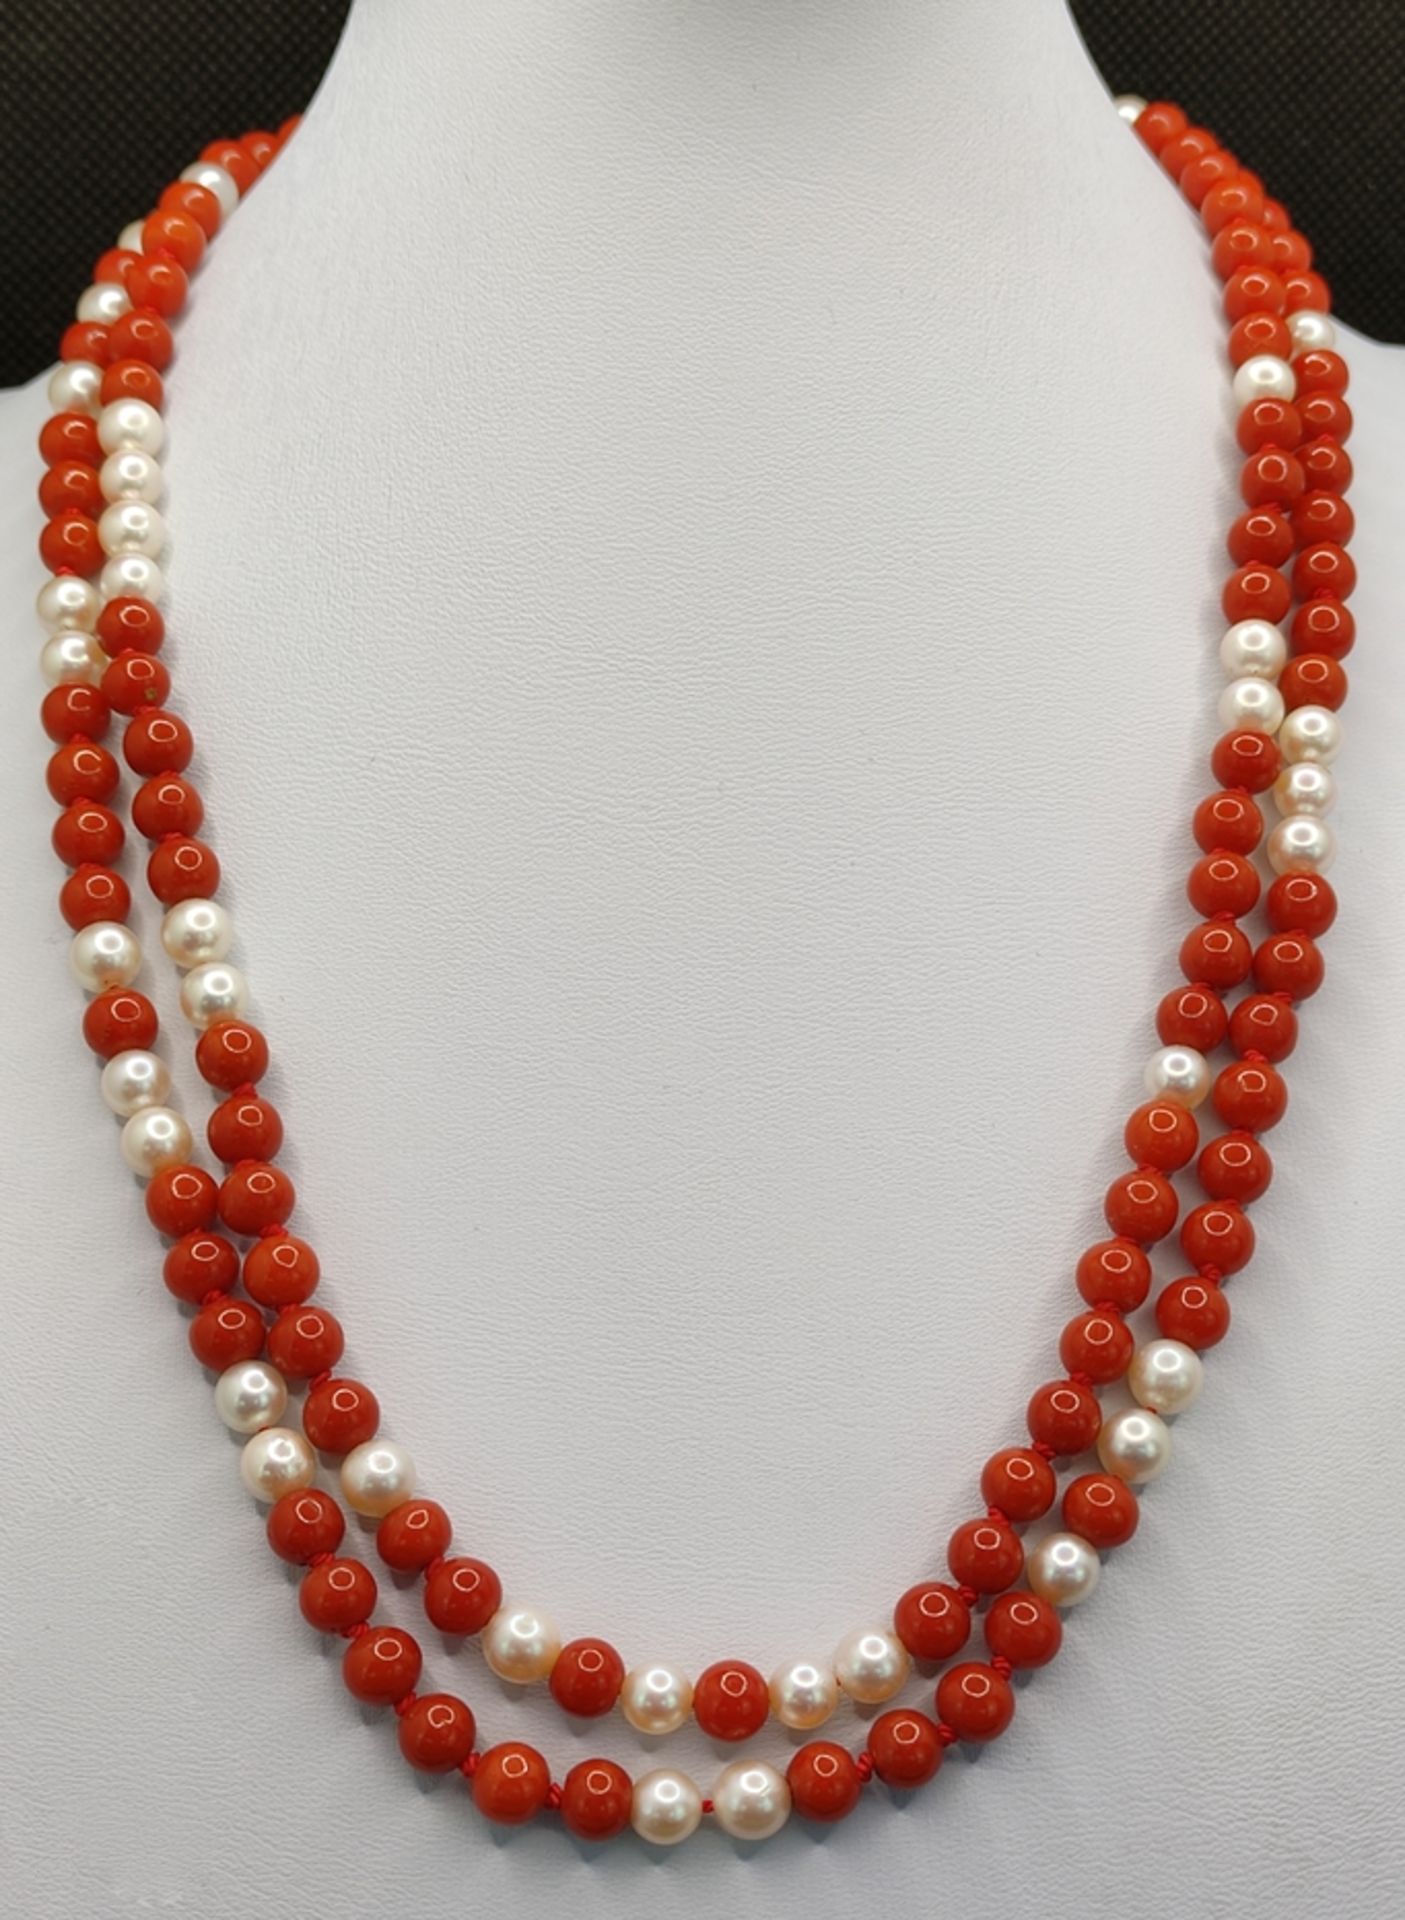 Long coral pearl necklace, round 585/14K yellow gold clasp, goldsmith design, italy, length 100cm - Image 2 of 4